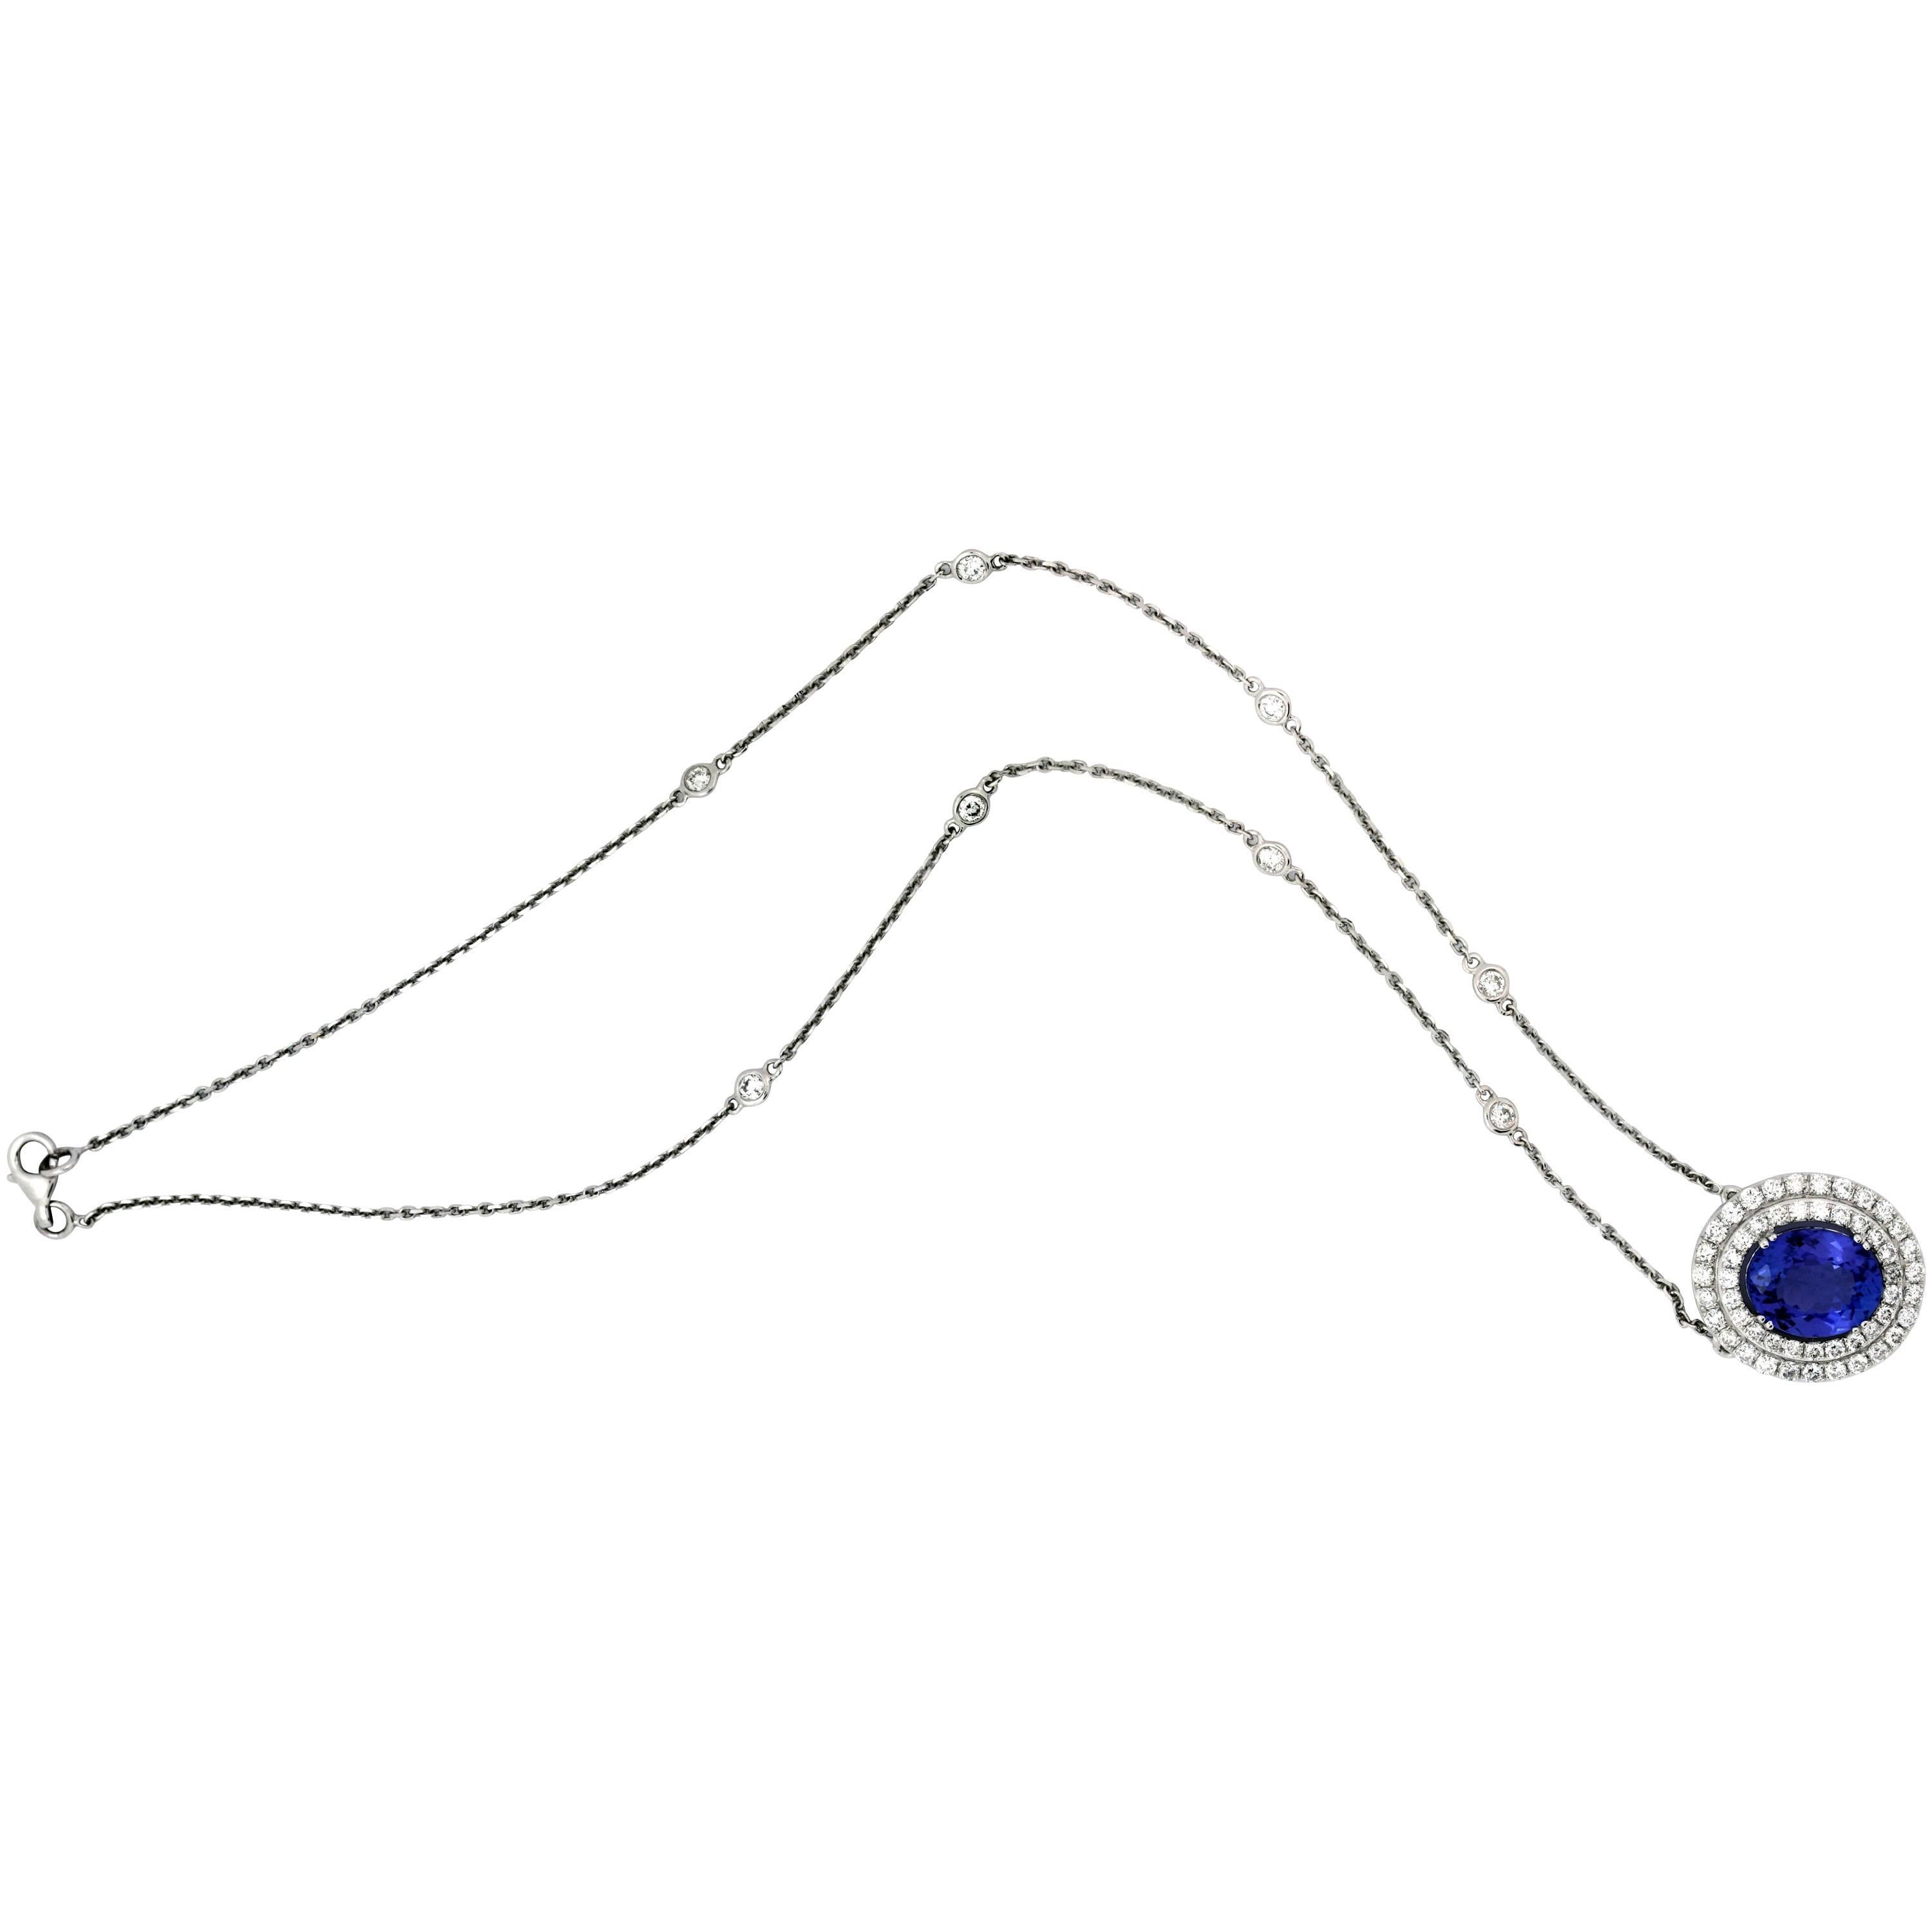 18K White Gold Pendant Necklace with Tanzanite Center and Diamonds

Center Tanzanite Pendant has double-row of diamonds.
Tanzanite: apprx. 1.35ct. Oval cut. Center pendant is 0.8 inch width.

Chain has 8 diamond bezels and measures 16 inches in